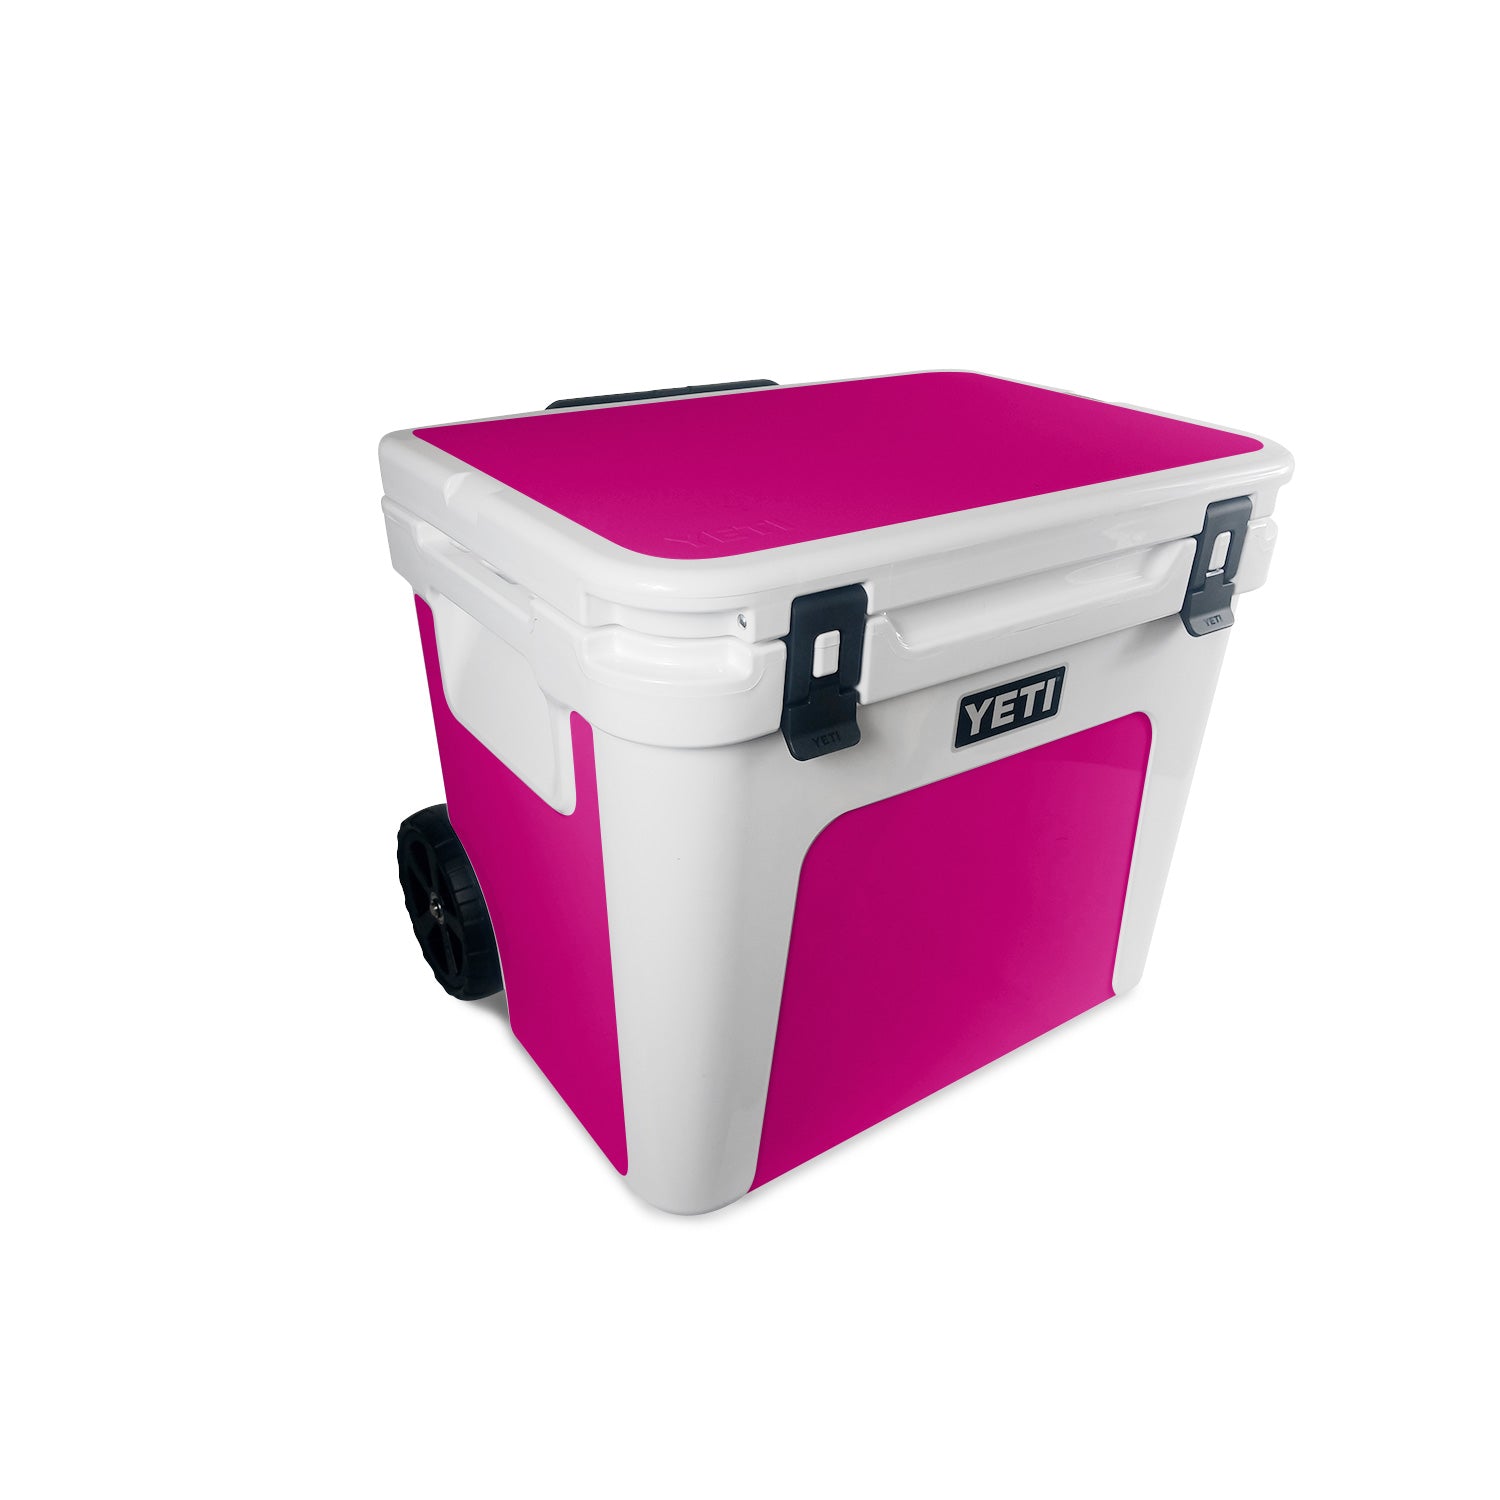 YETI Roadie 60 Rescue Red 60 qt Hard Cooler - Ace Hardware